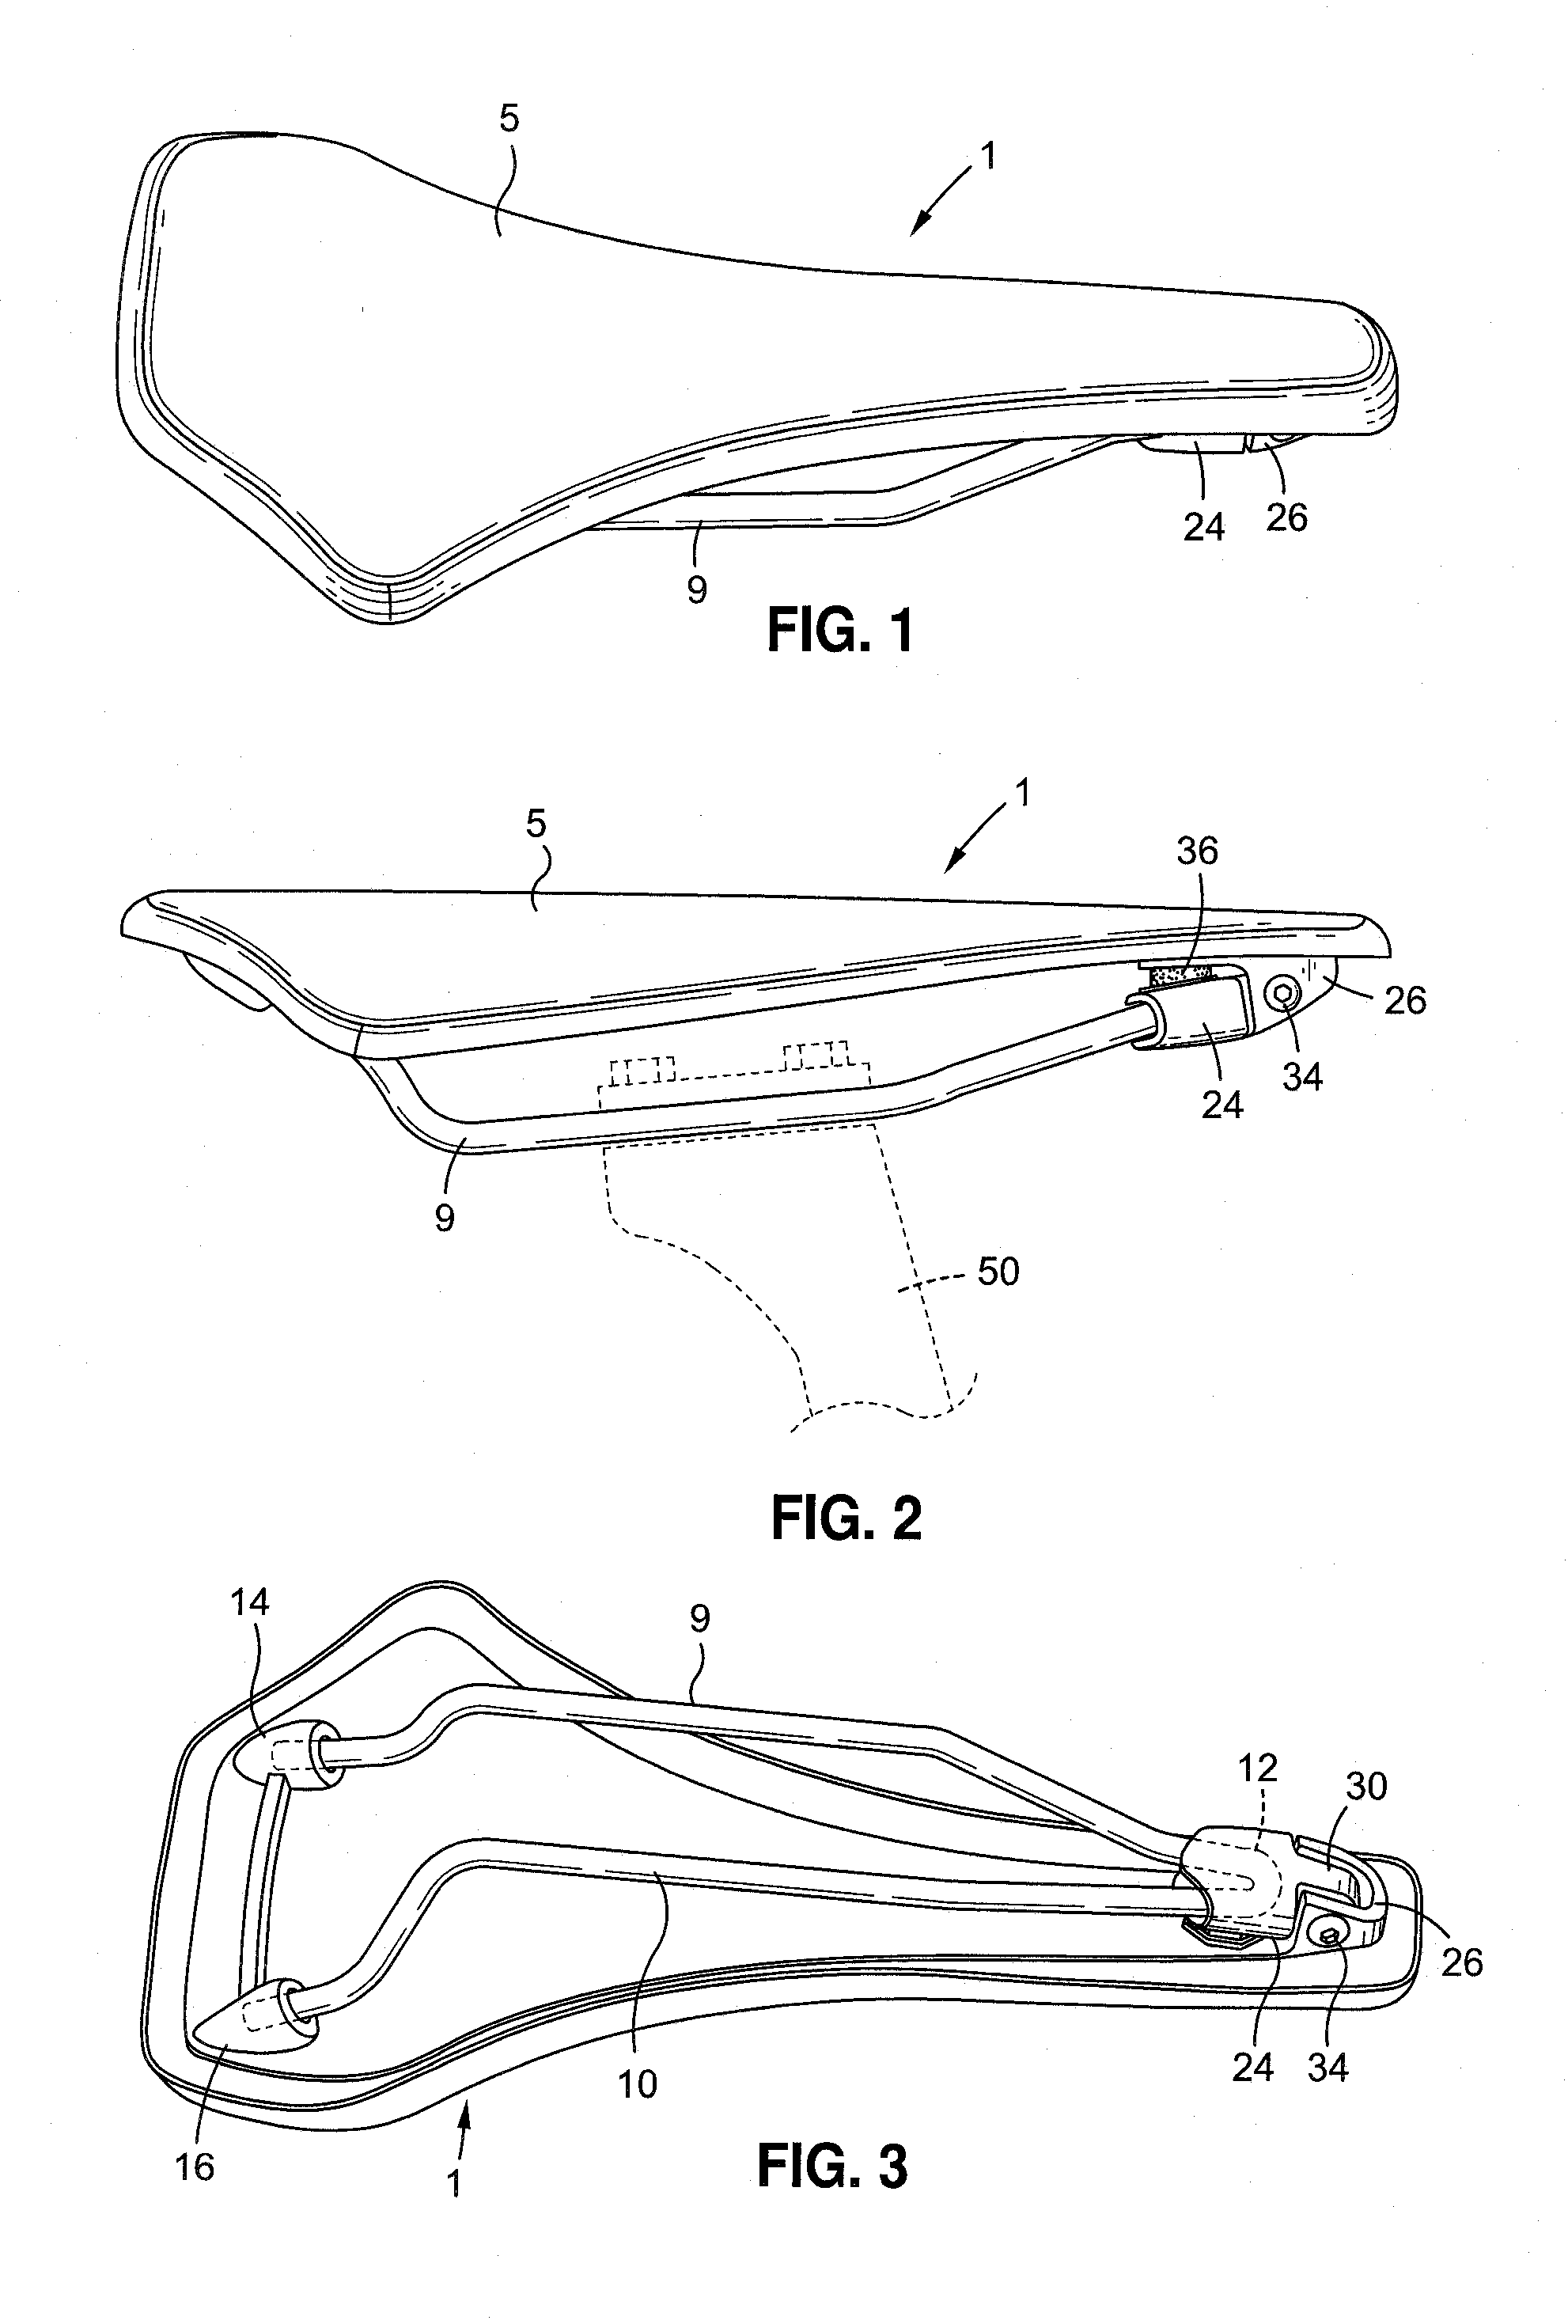 Adjustable flex saddle for a bicycle or a motorcycle